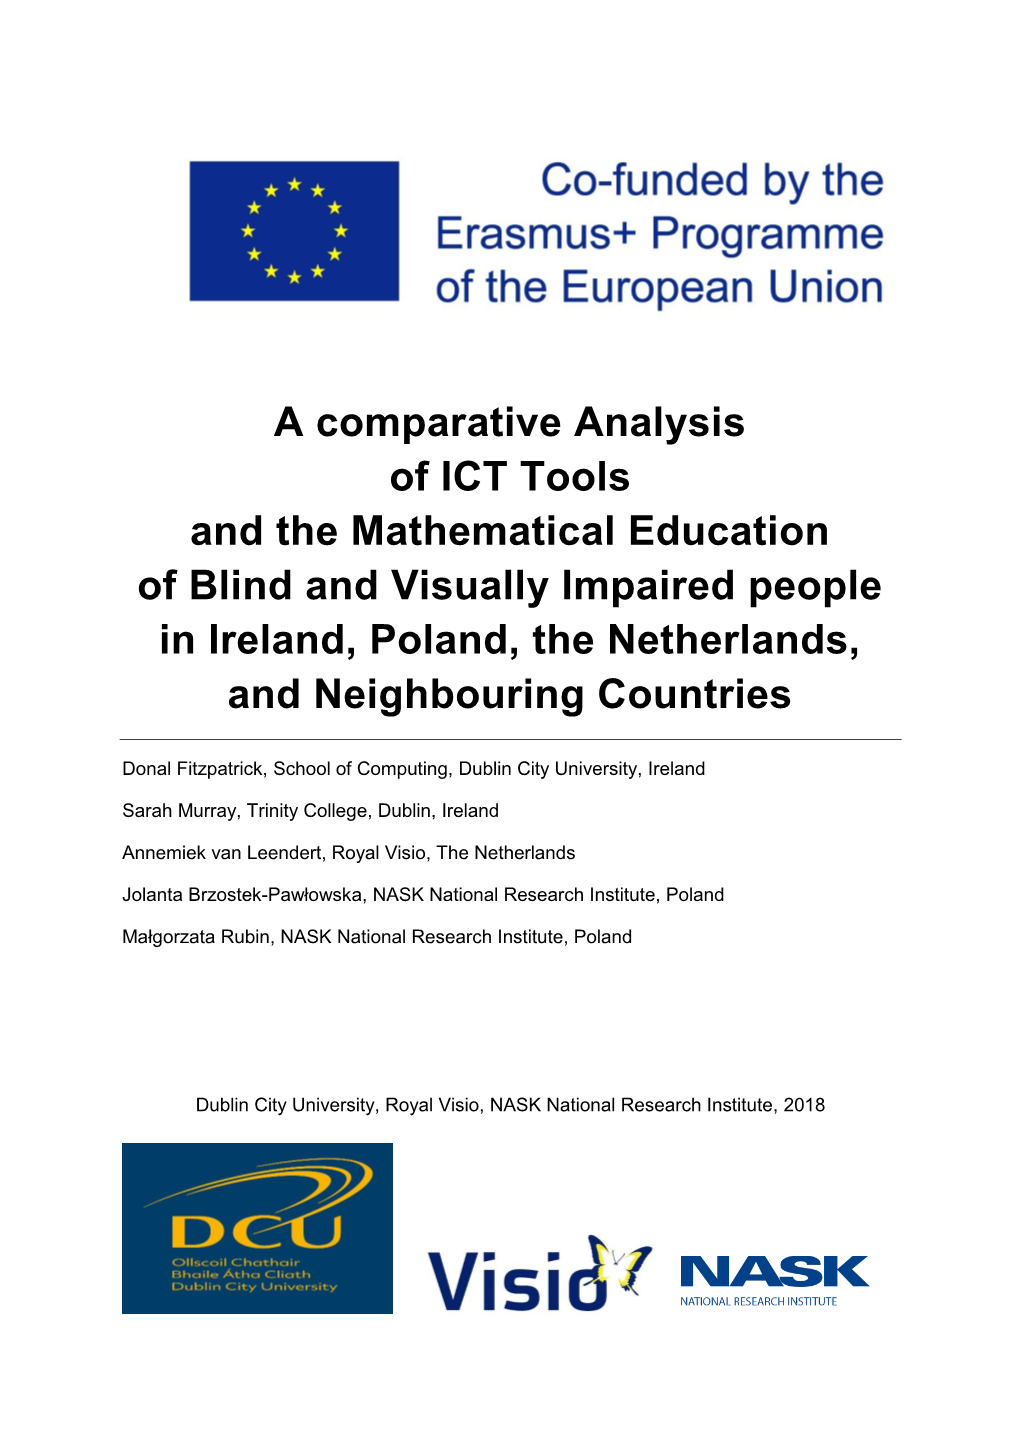 A Comparative Analysis of ICT Tools and the Mathematical Education Of